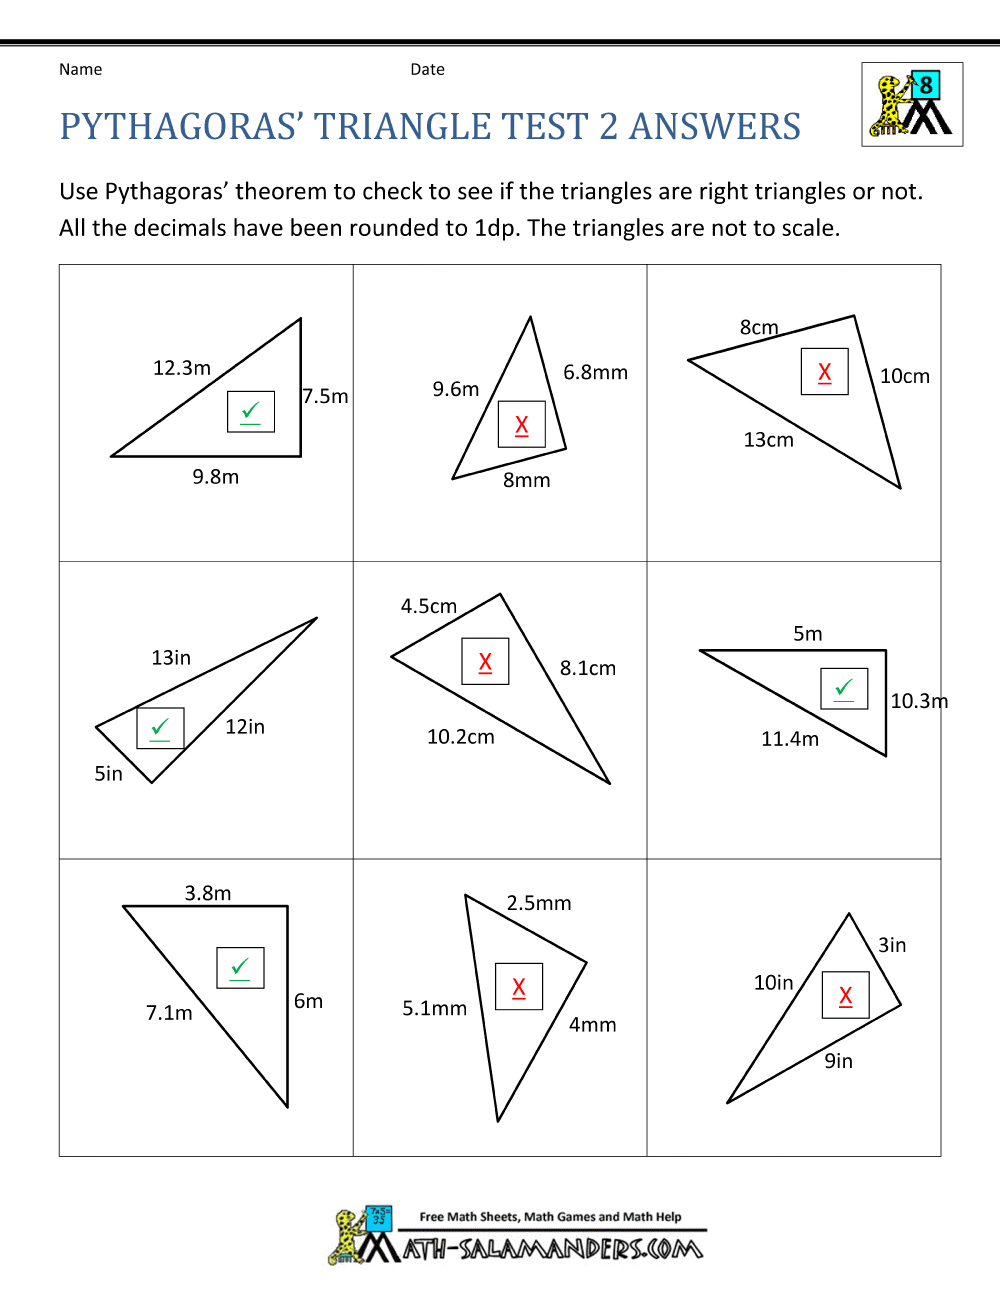 Pythagoras Theorem Questions For Right Triangle Trigonometry Worksheet Answers